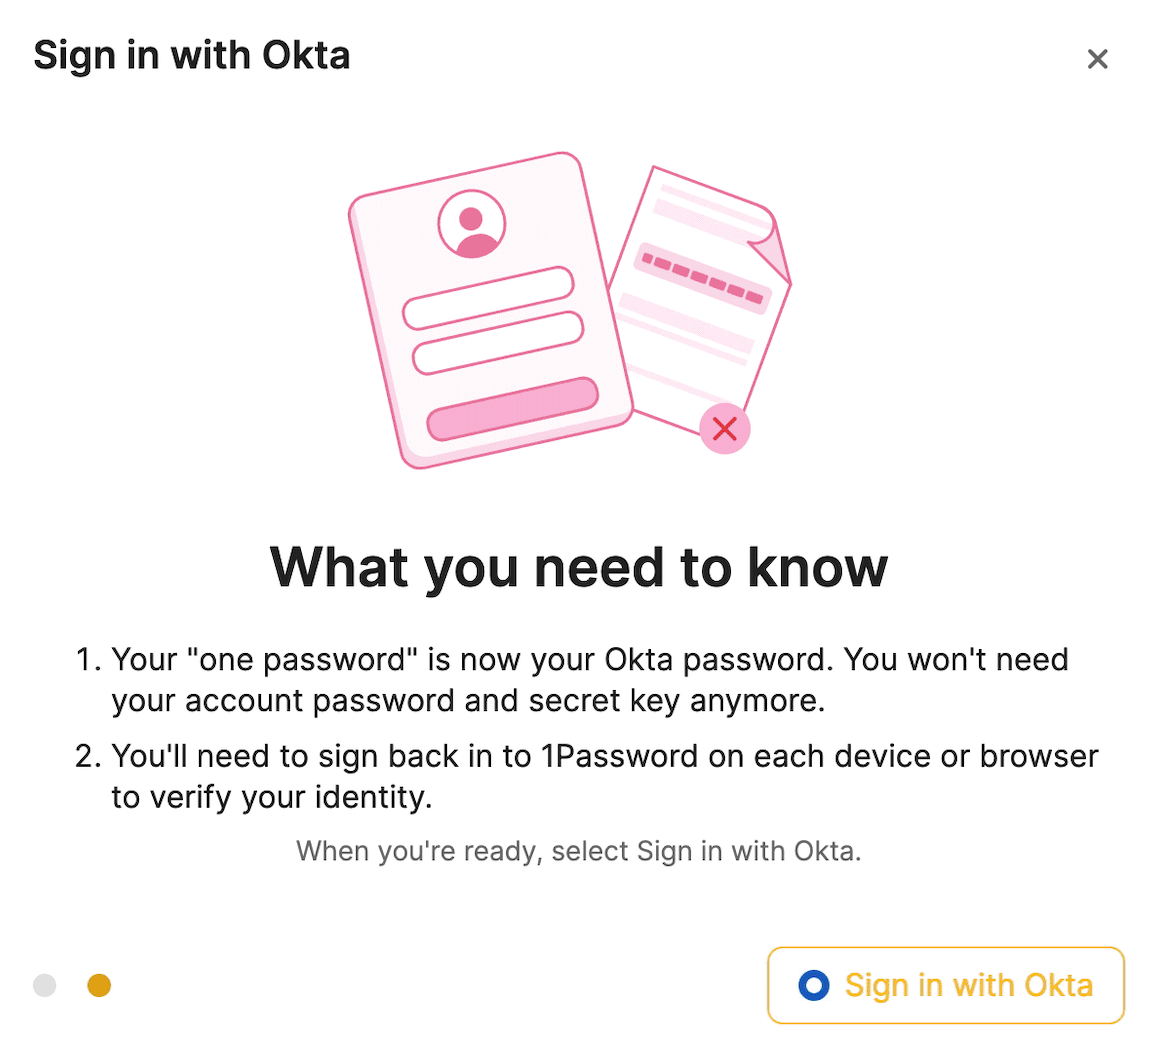 Screenshot of a notification in the 1Password app, explaining what the user needs to know about Sign in with Okta.